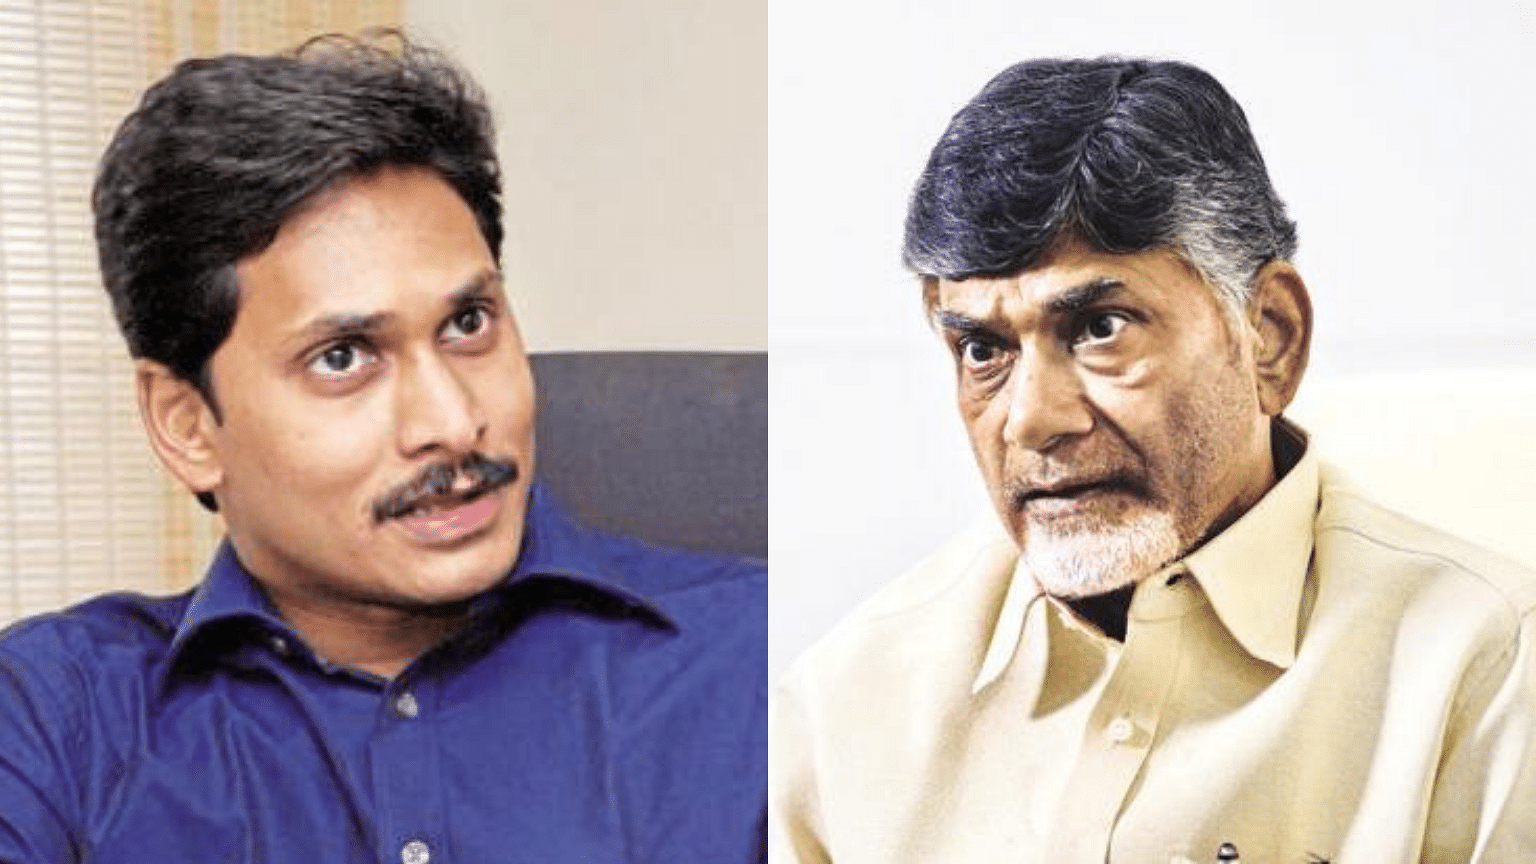 Here are the battles that will determine the war between YSRC’s Jagan Mohan Reddy and TDP’s Chandrababu Naidu.